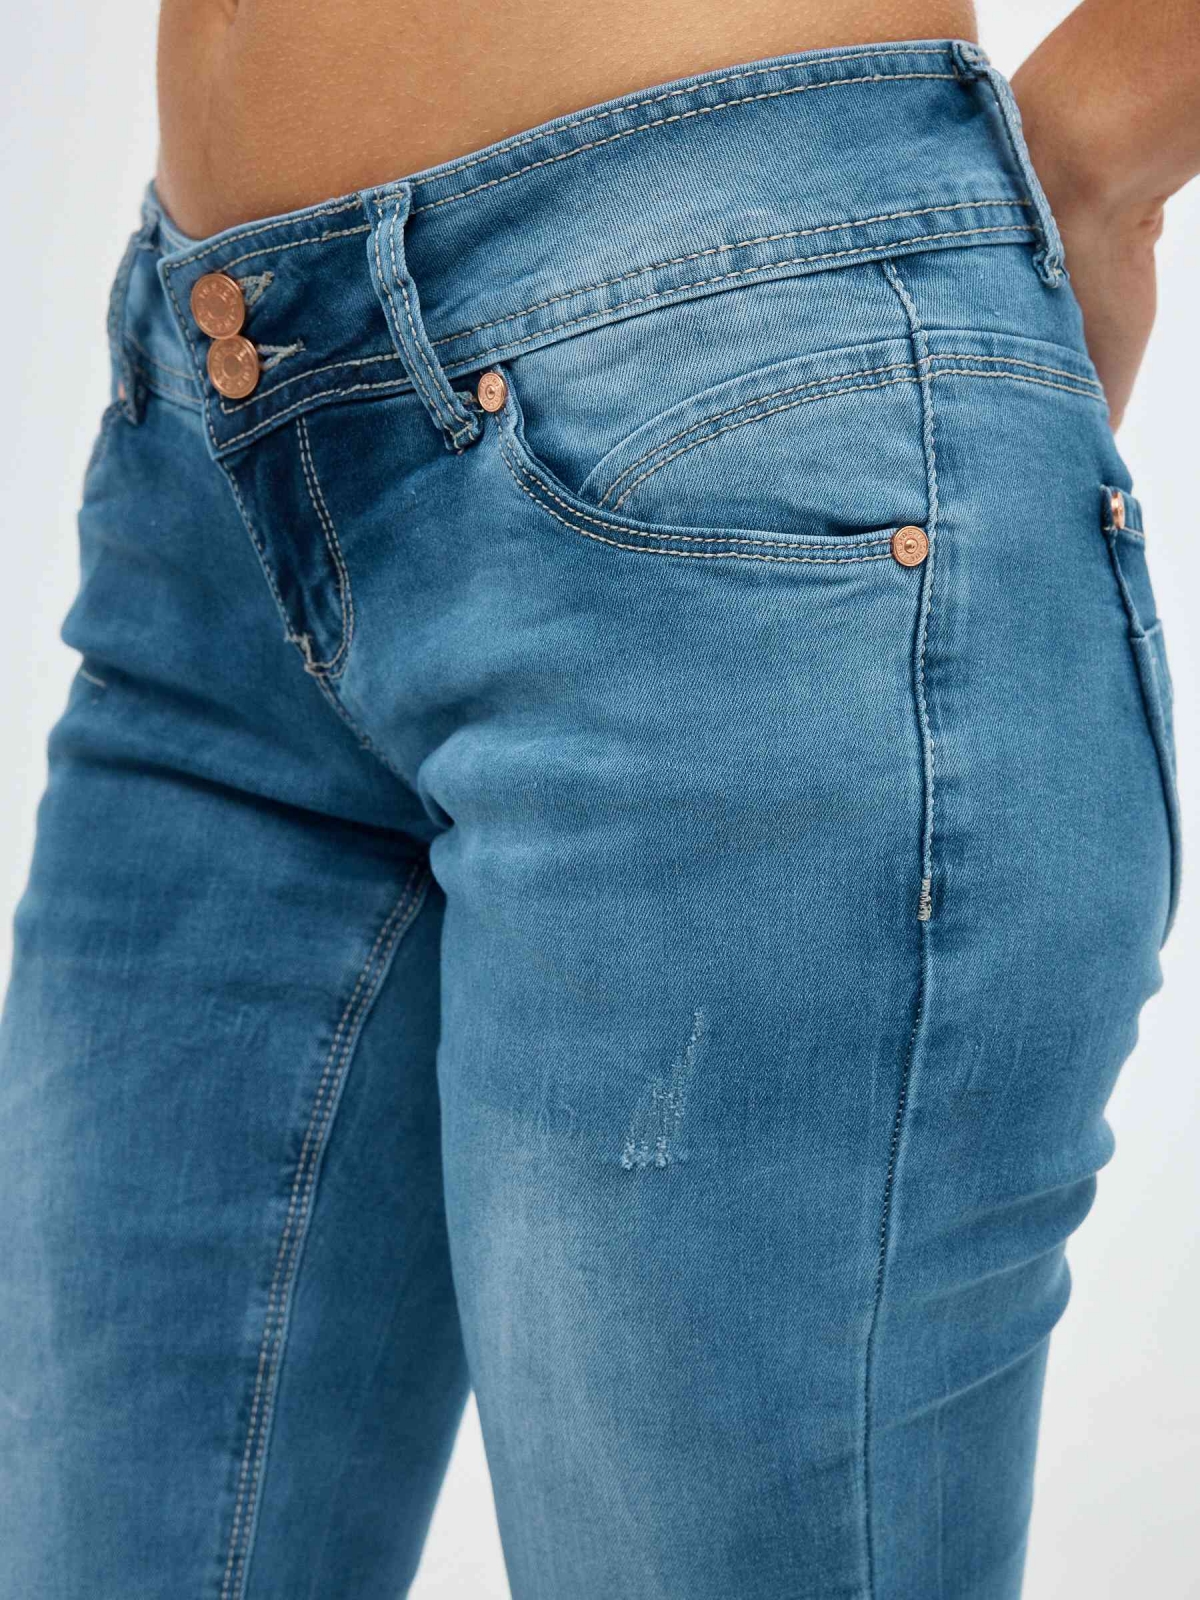 Low rise washed effect skinny jeans blue detail view